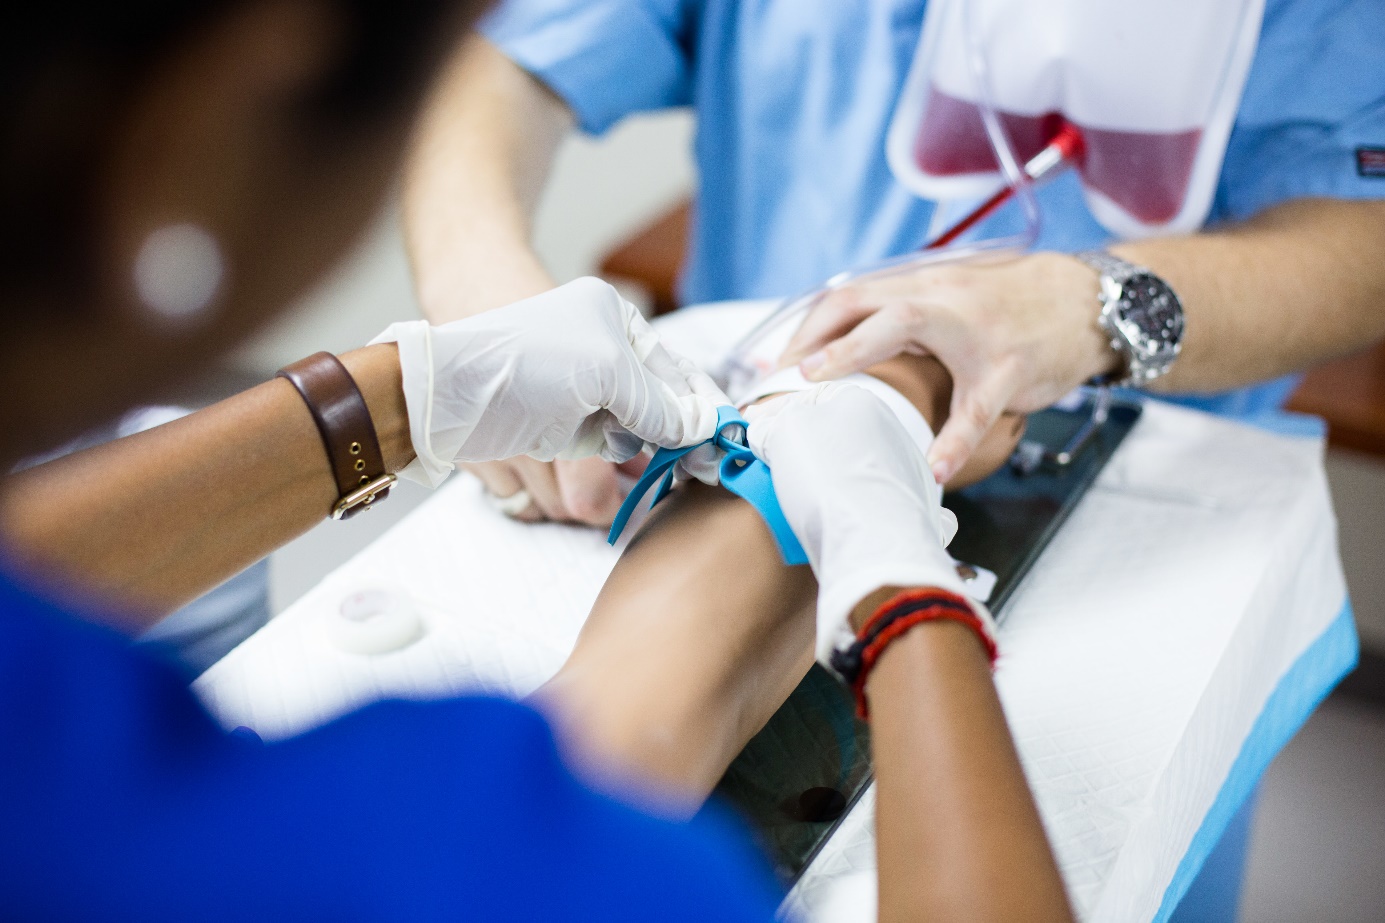 A nurse putting a needle on a patient's arm

Description automatically generated